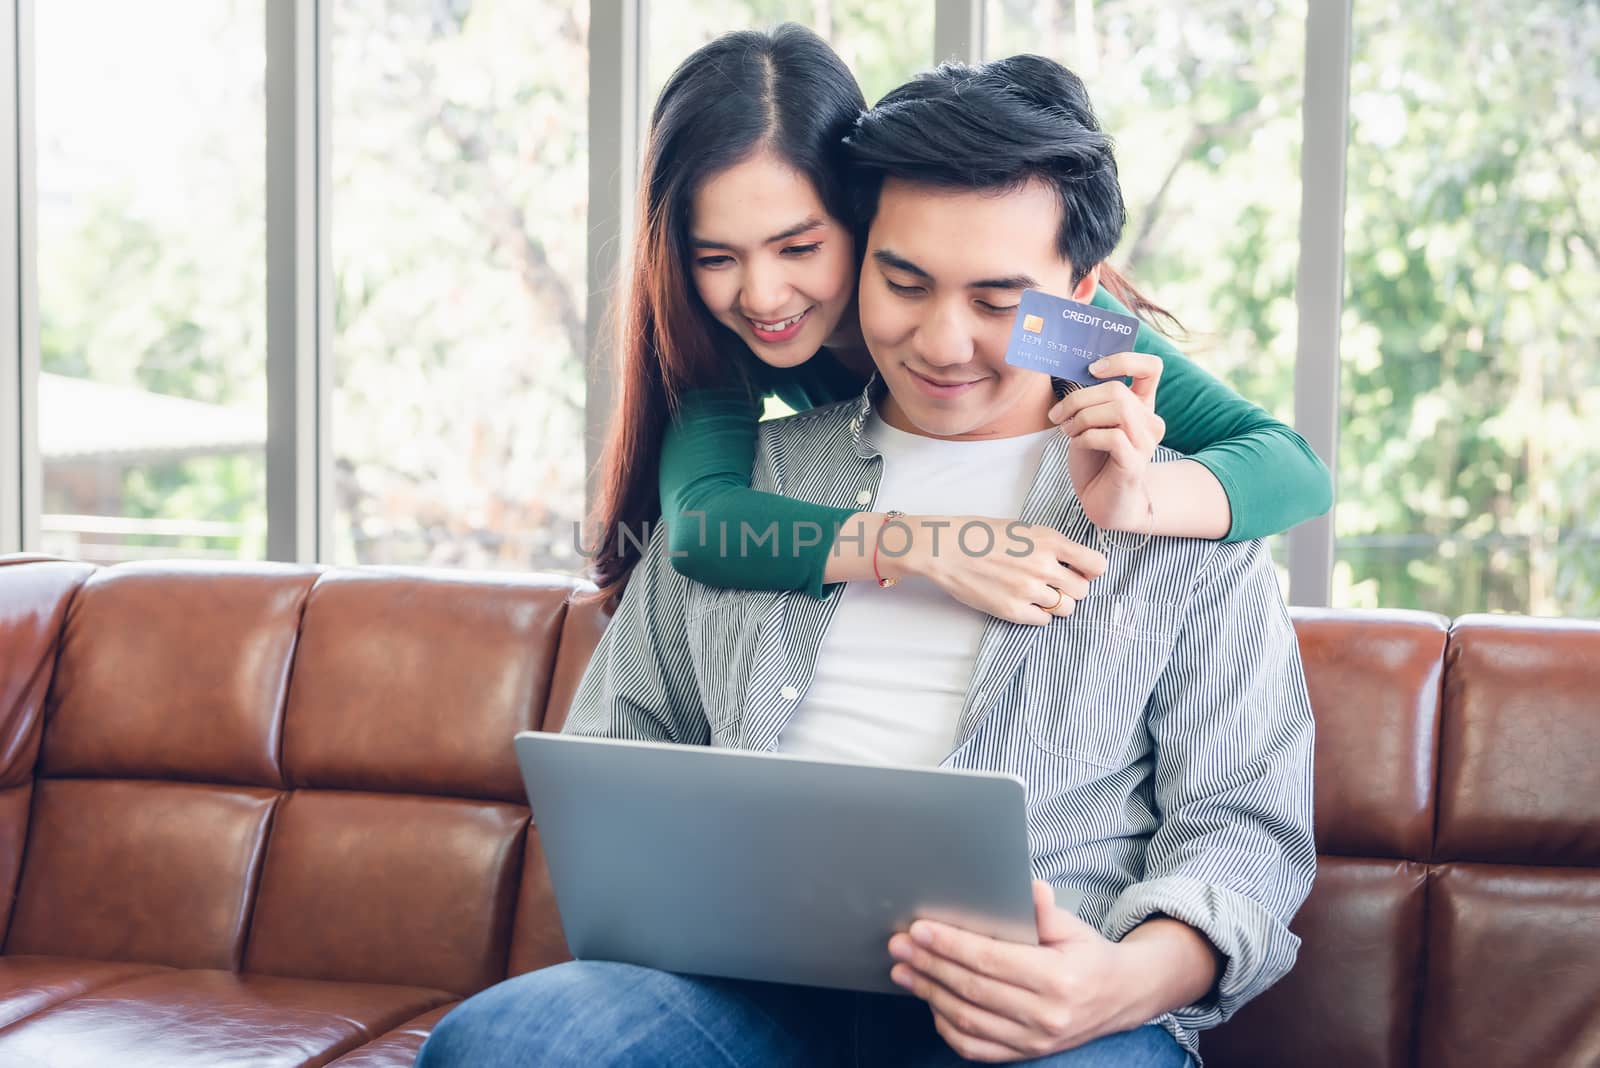 Couple Love Having Enjoy Relaxation on Sofa at Their Home, Attractive Asian Couple Happiness in Romantic Moments at Living Room While Online Shopping and Work at Home. Relaxing and Lifestyles Concept